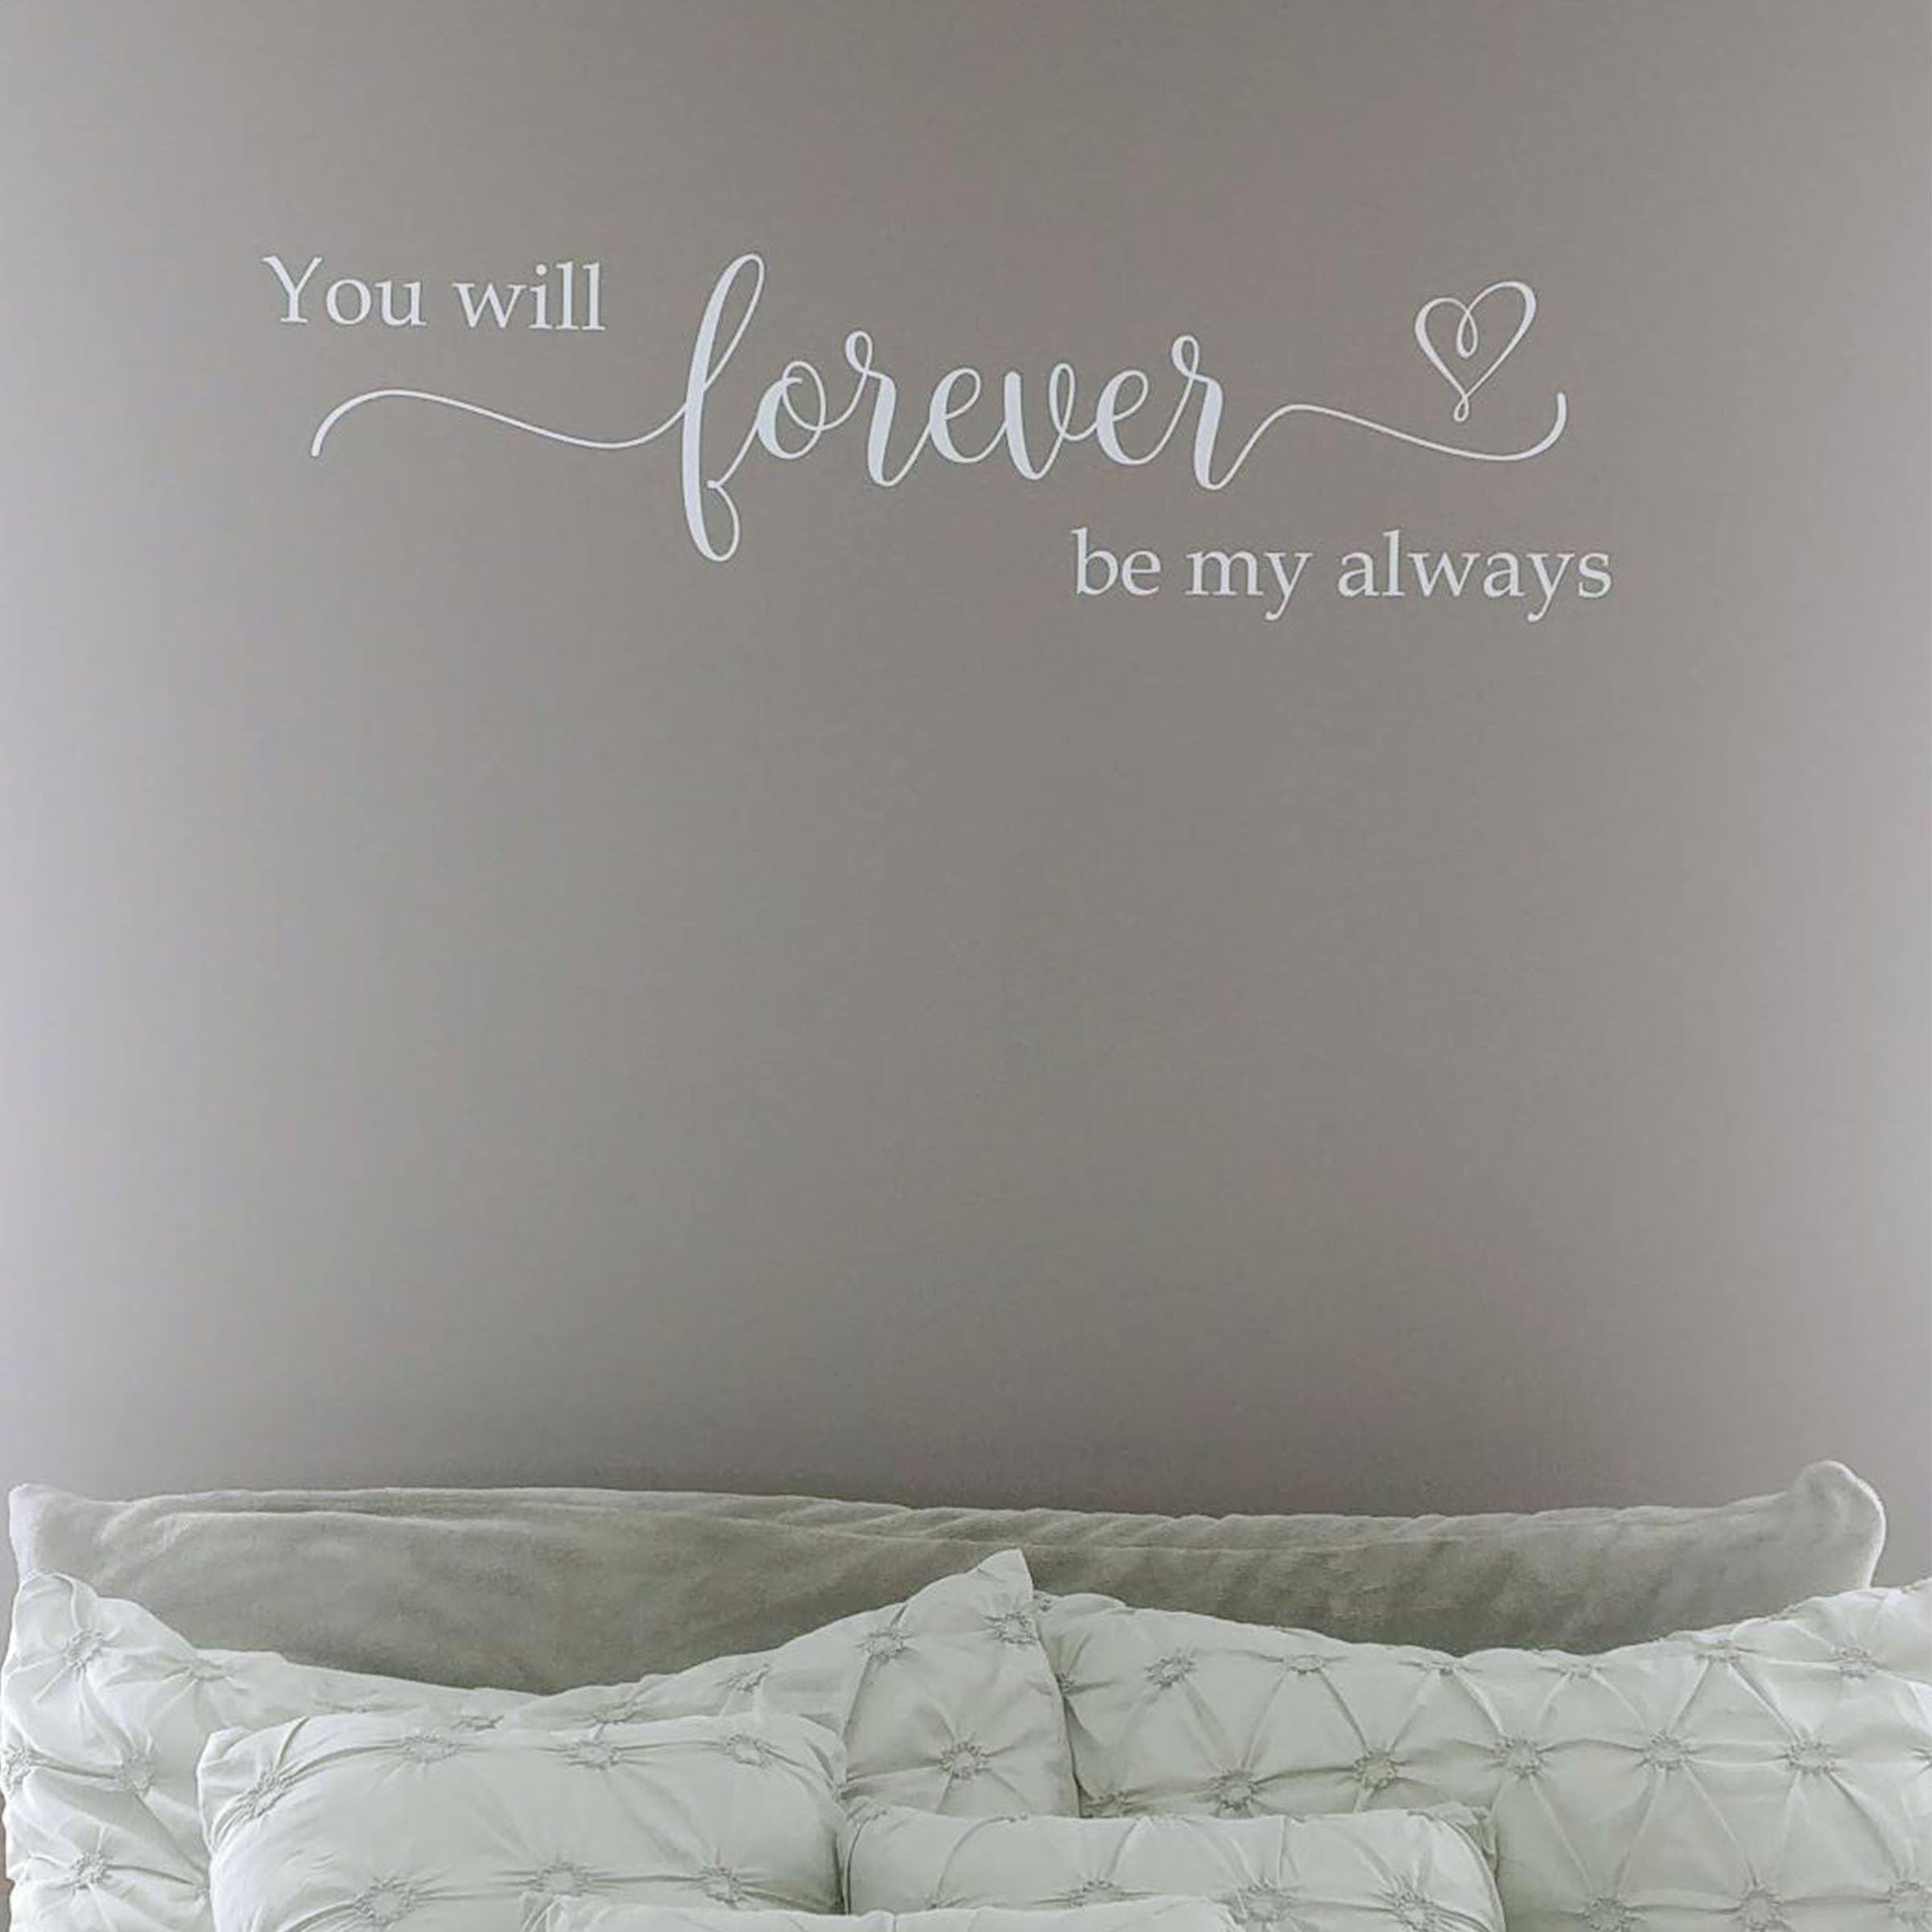 YOU WILL FOREVER BE MY ALWAYS WALL DECAL WEDDING DECAL ROMANTIC DECAL LOVE WALL 